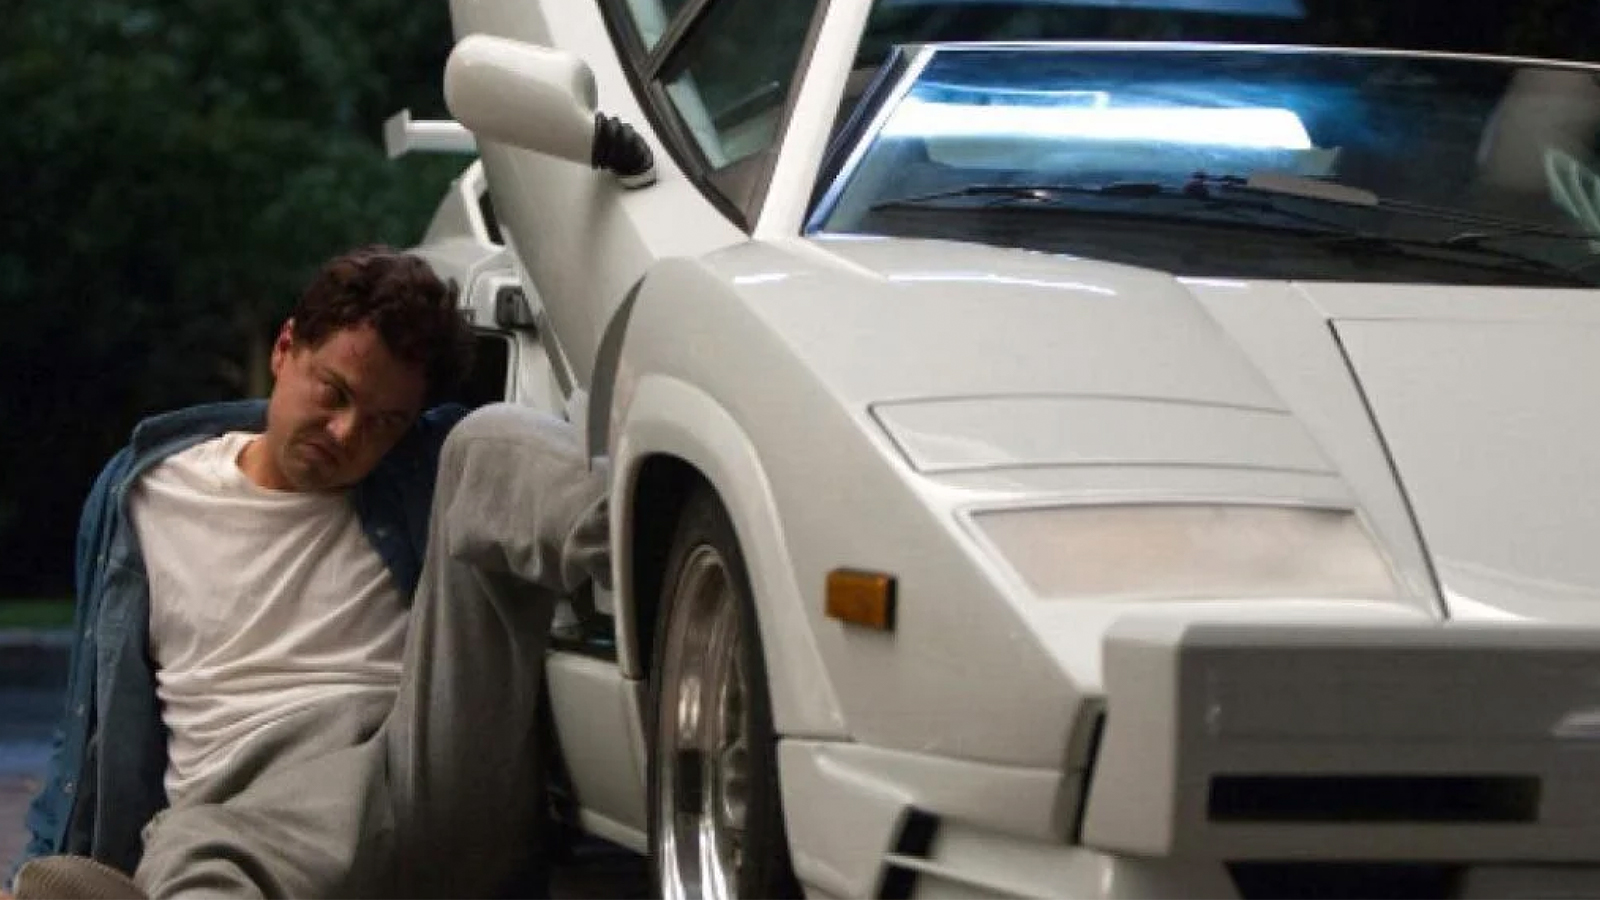 The Real Wrecked Lamborghini Countach From Wolf of Wall Street Is